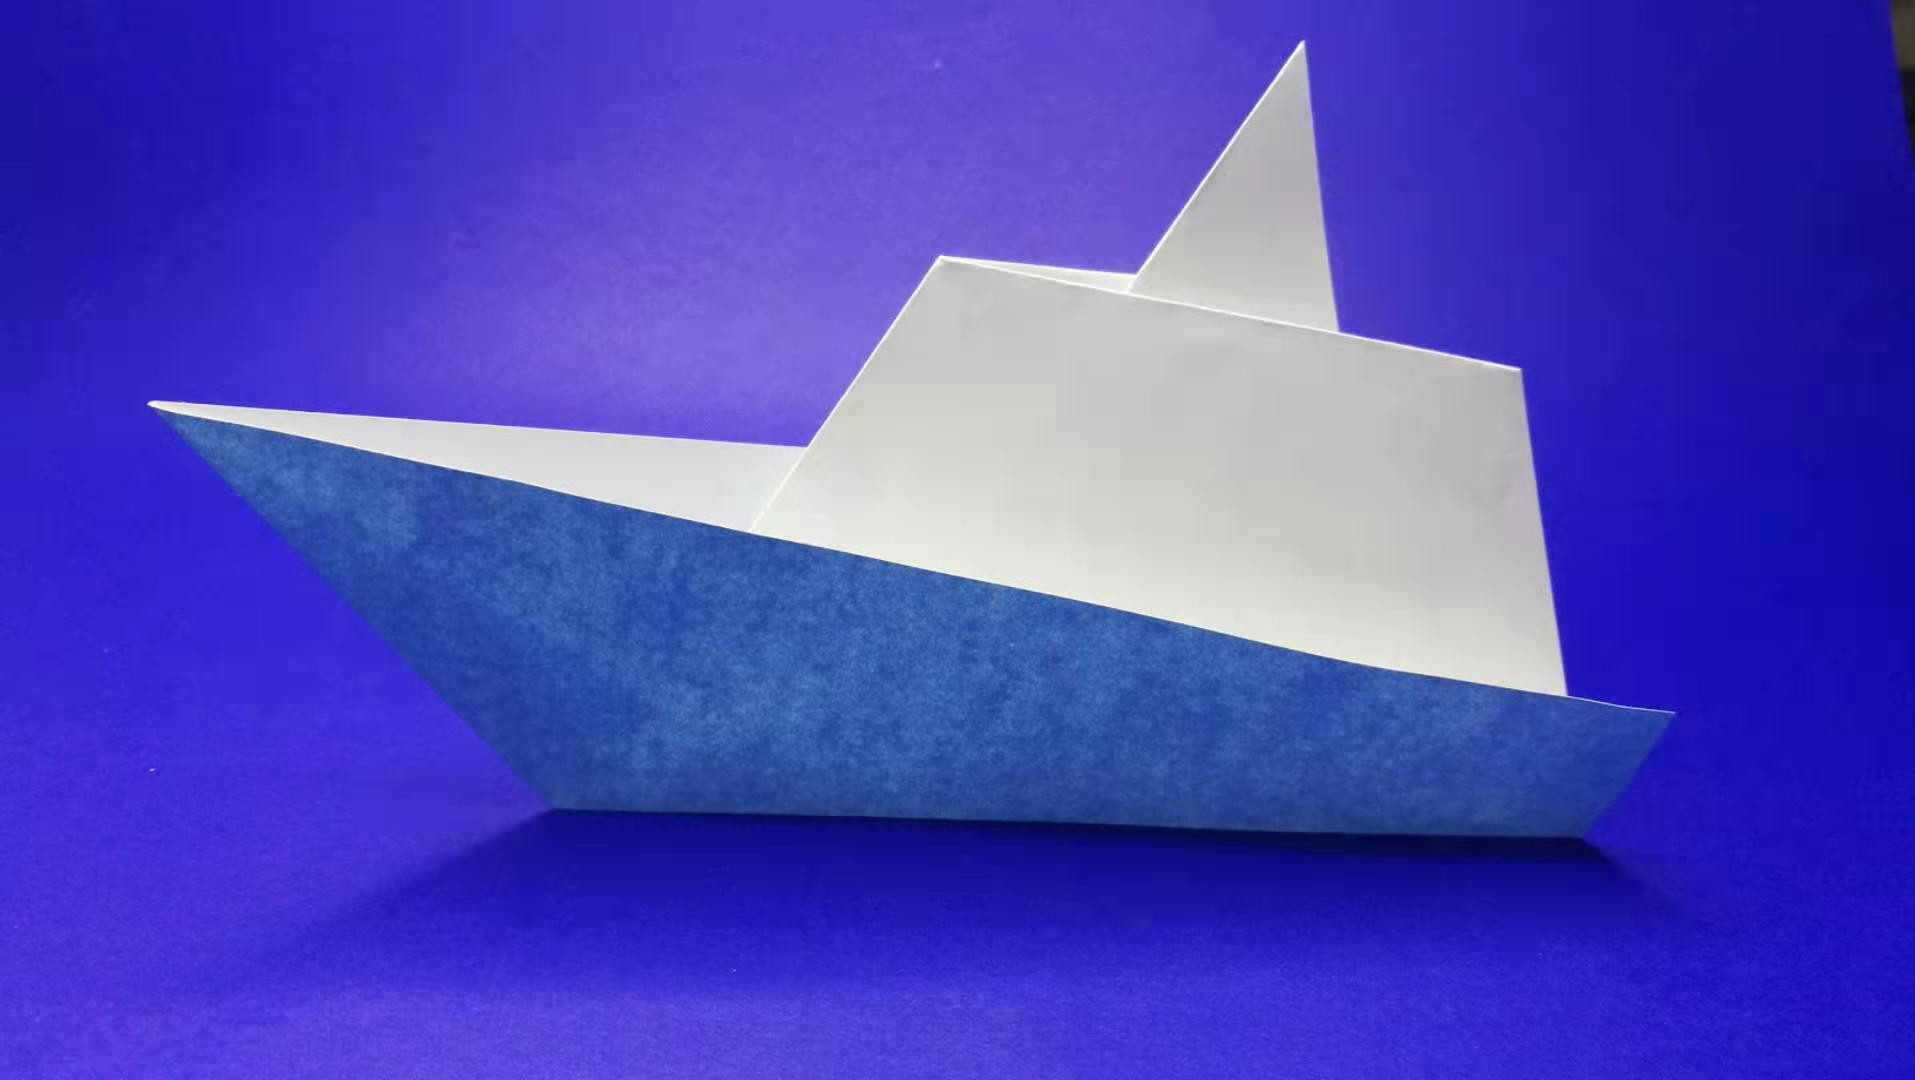 How To Make An Origami Boat Easy How To Make An Easy Origami Boat Origami Folding Instructions